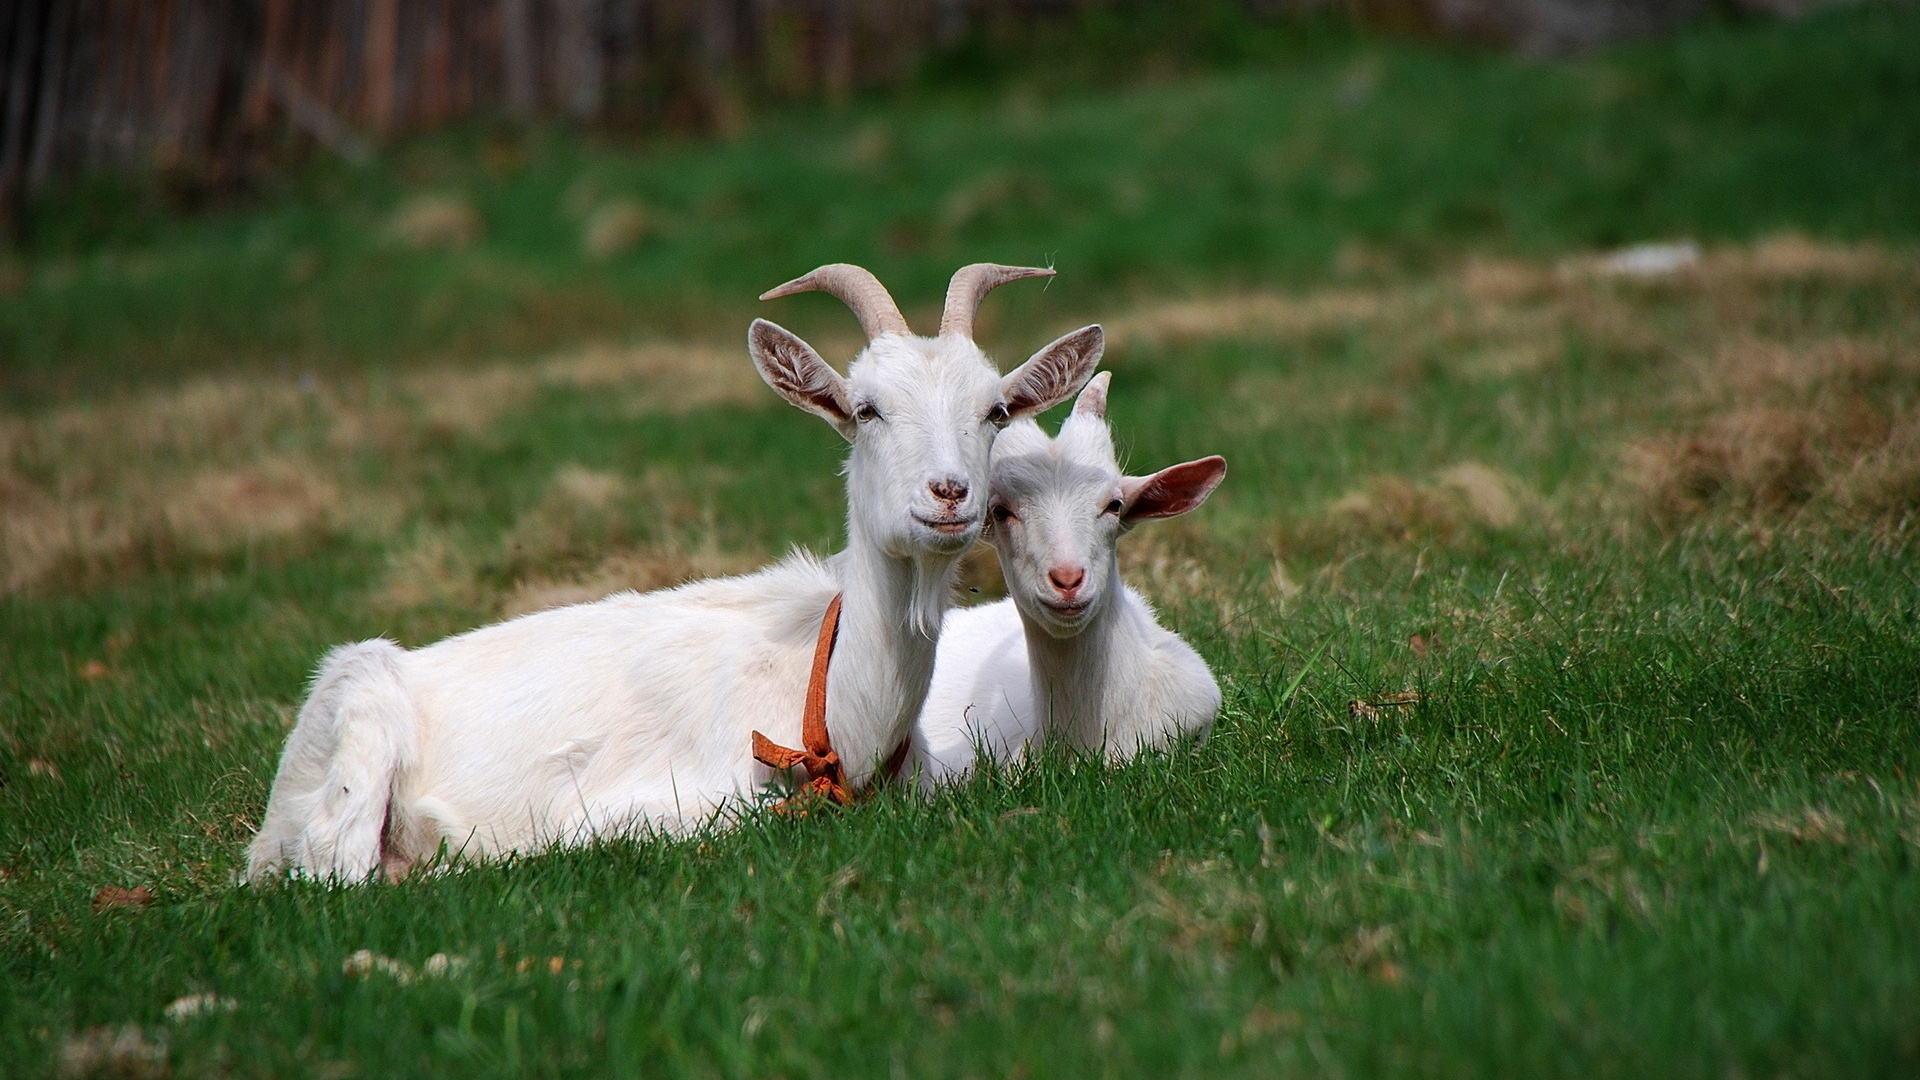 White Goat on Green Grass Field During Daytime. Wallpaper in 1920x1080 Resolution